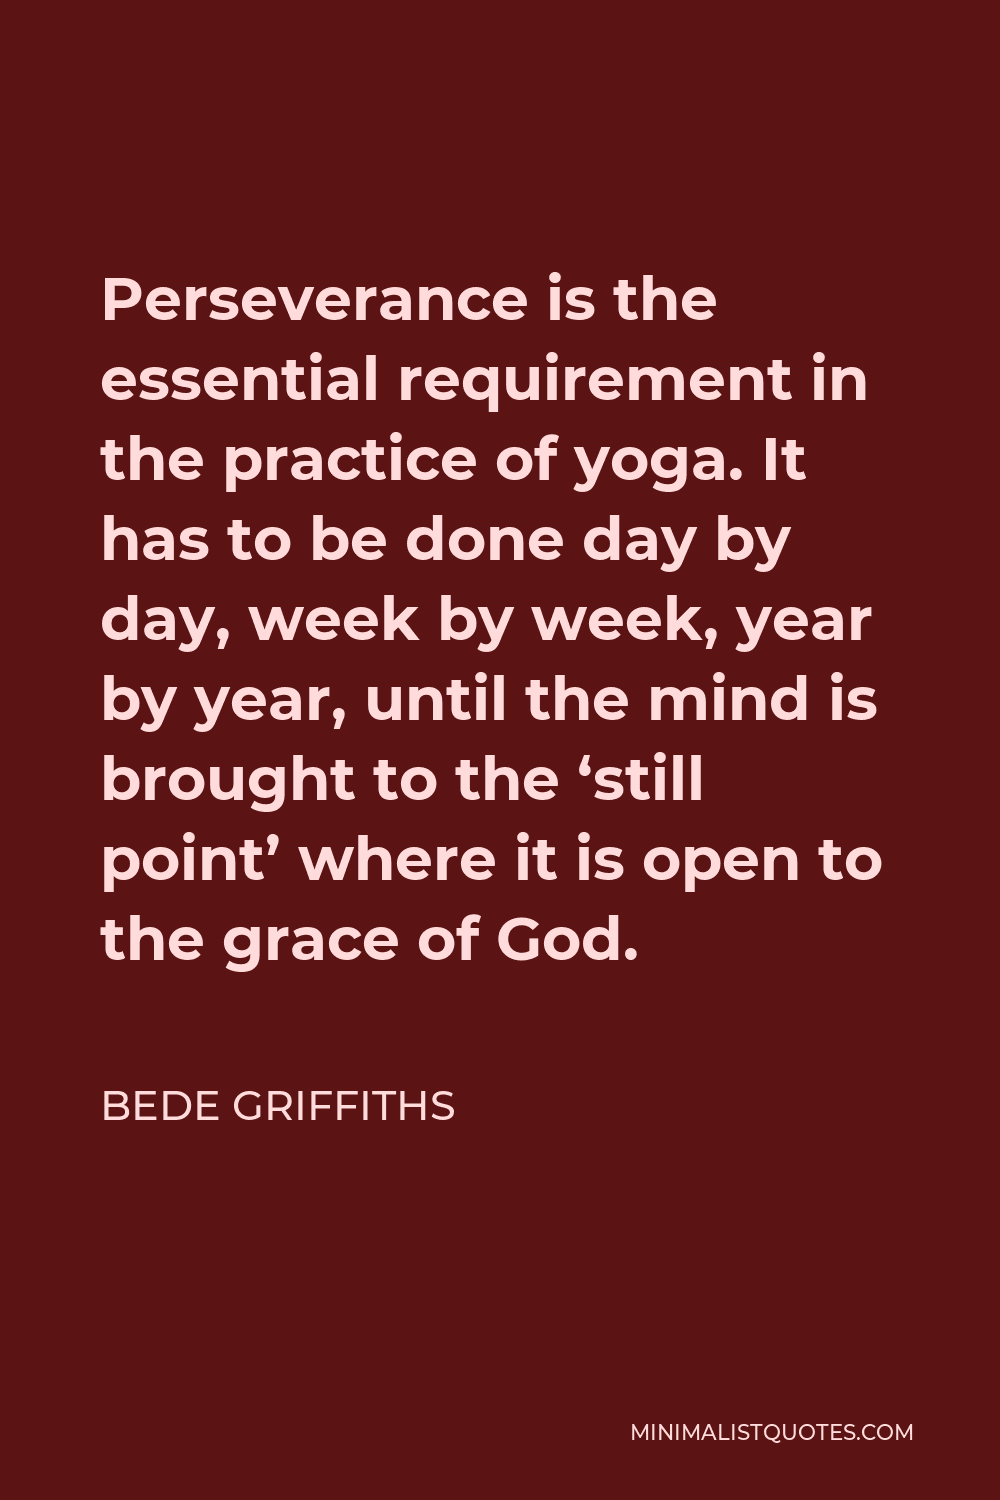 Bede Griffiths Quote - Perseverance is the essential requirement in the practice of yoga. It has to be done day by day, week by week, year by year, until the mind is brought to the ‘still point’ where it is open to the grace of God.